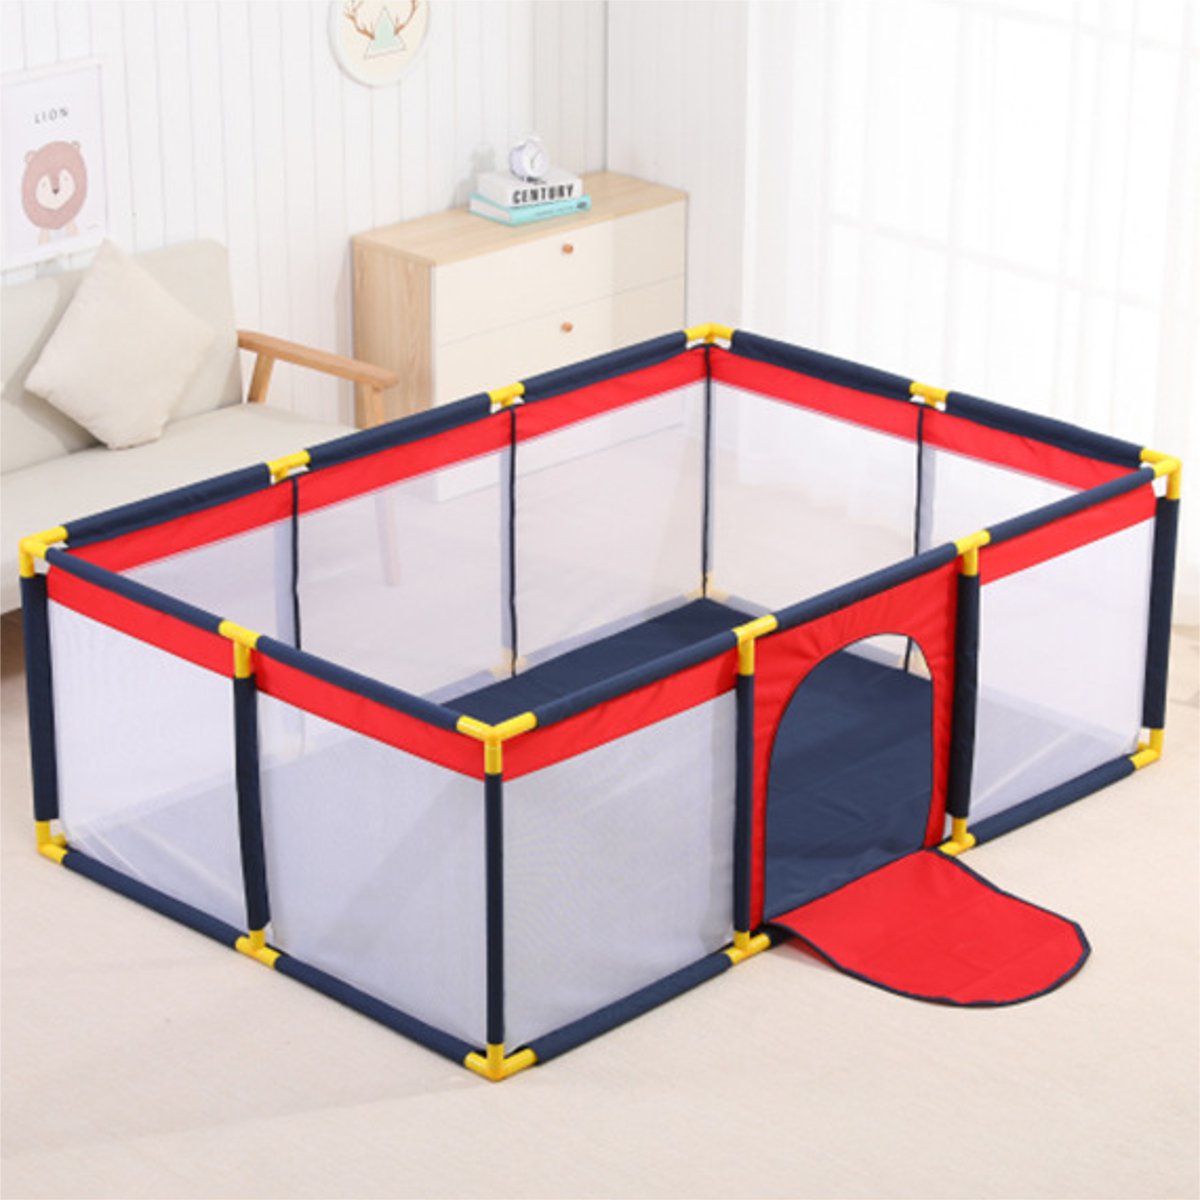 Baby-Playpen-Interactive-Safety-Indoor-Gate-Play-Yards-Tent-Court-Kids-Furniture-for-Children-Large--1688114-4